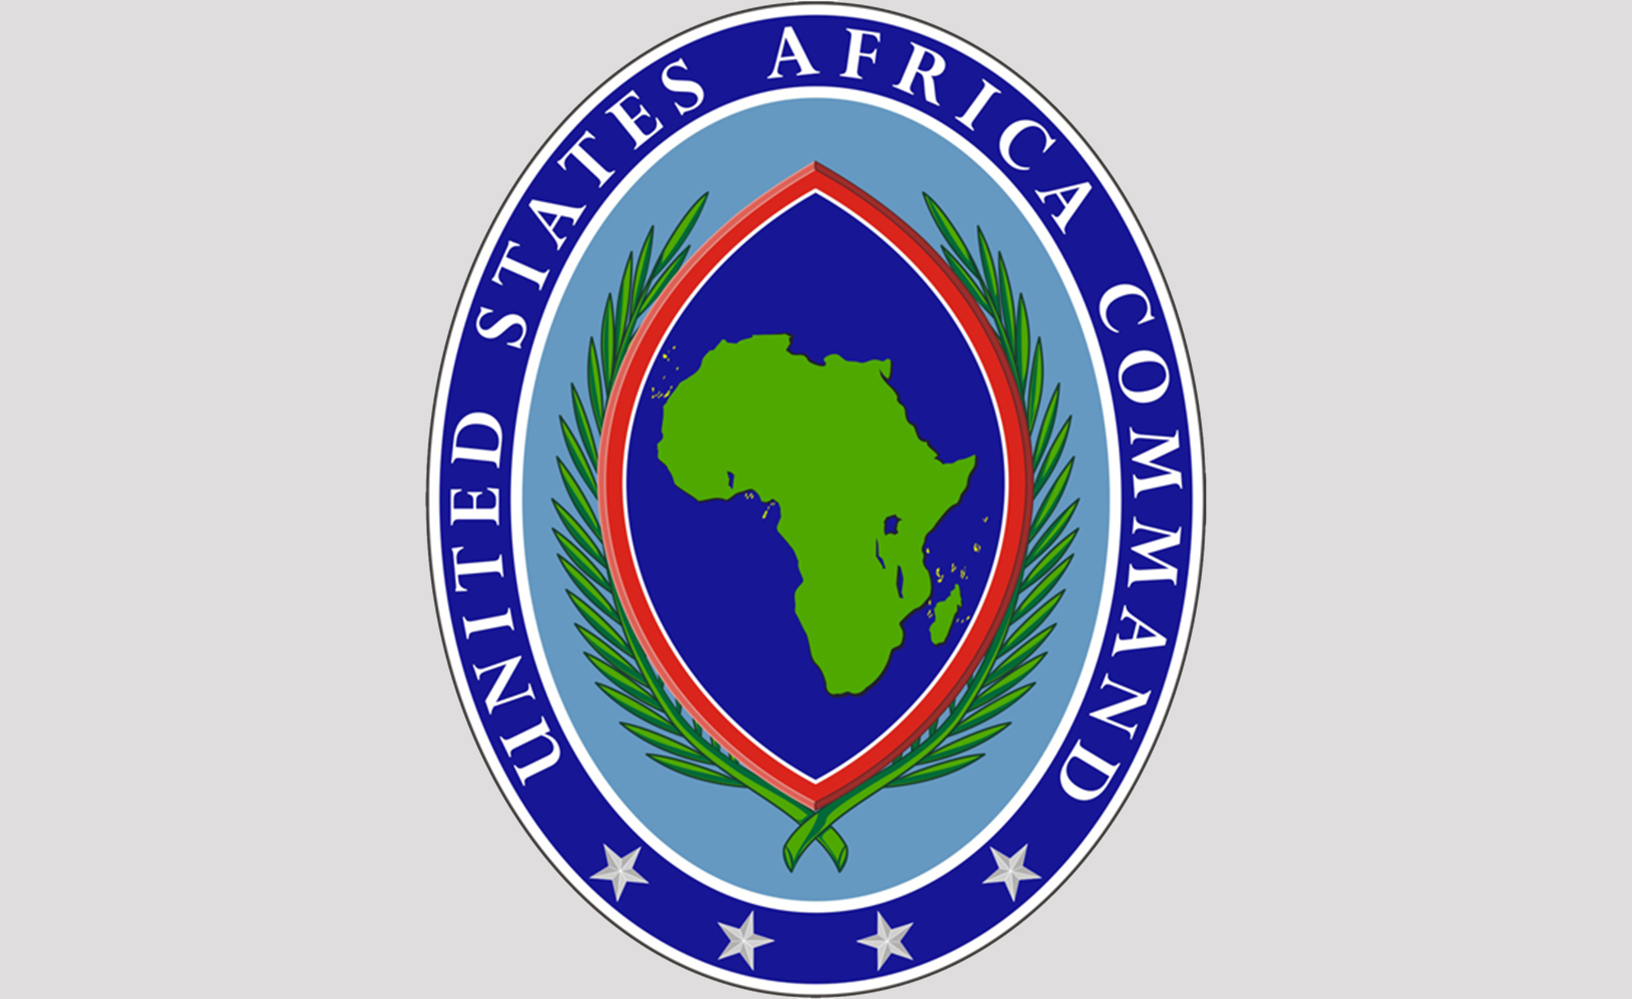 NATO and Africa: A Relationship of Colonial Violence and Structural White Supremacy